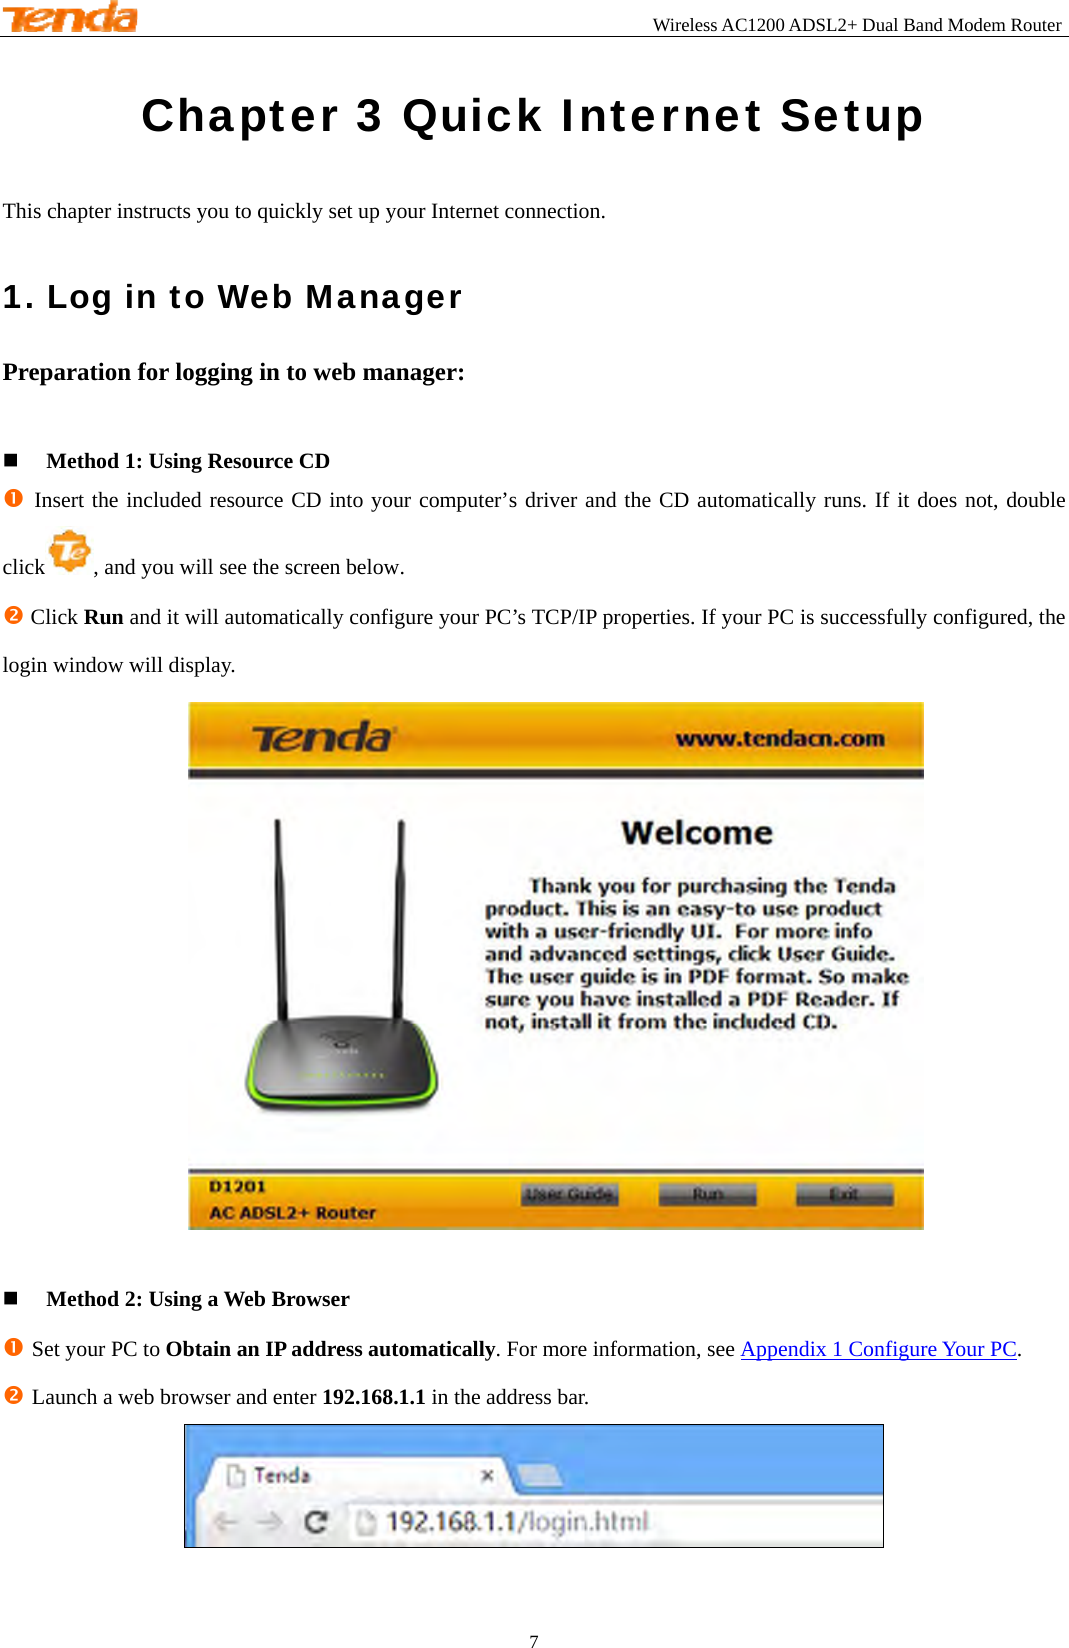                                                        Wireless AC1200 ADSL2+ Dual Band Modem Router 7  Chapter 3 Quick Internet Setup This chapter instructs you to quickly set up your Internet connection. 1. Log in to Web Manager Preparation for logging in to web manager:   Method 1: Using Resource CD n Insert the included resource CD into your computer’s driver and the CD automatically runs. If it does not, double click , and you will see the screen below. o Click Run and it will automatically configure your PC’s TCP/IP properties. If your PC is successfully configured, the login window will display.    Method 2: Using a Web Browser n Set your PC to Obtain an IP address automatically. For more information, see Appendix 1 Configure Your PC. o Launch a web browser and enter 192.168.1.1 in the address bar.    